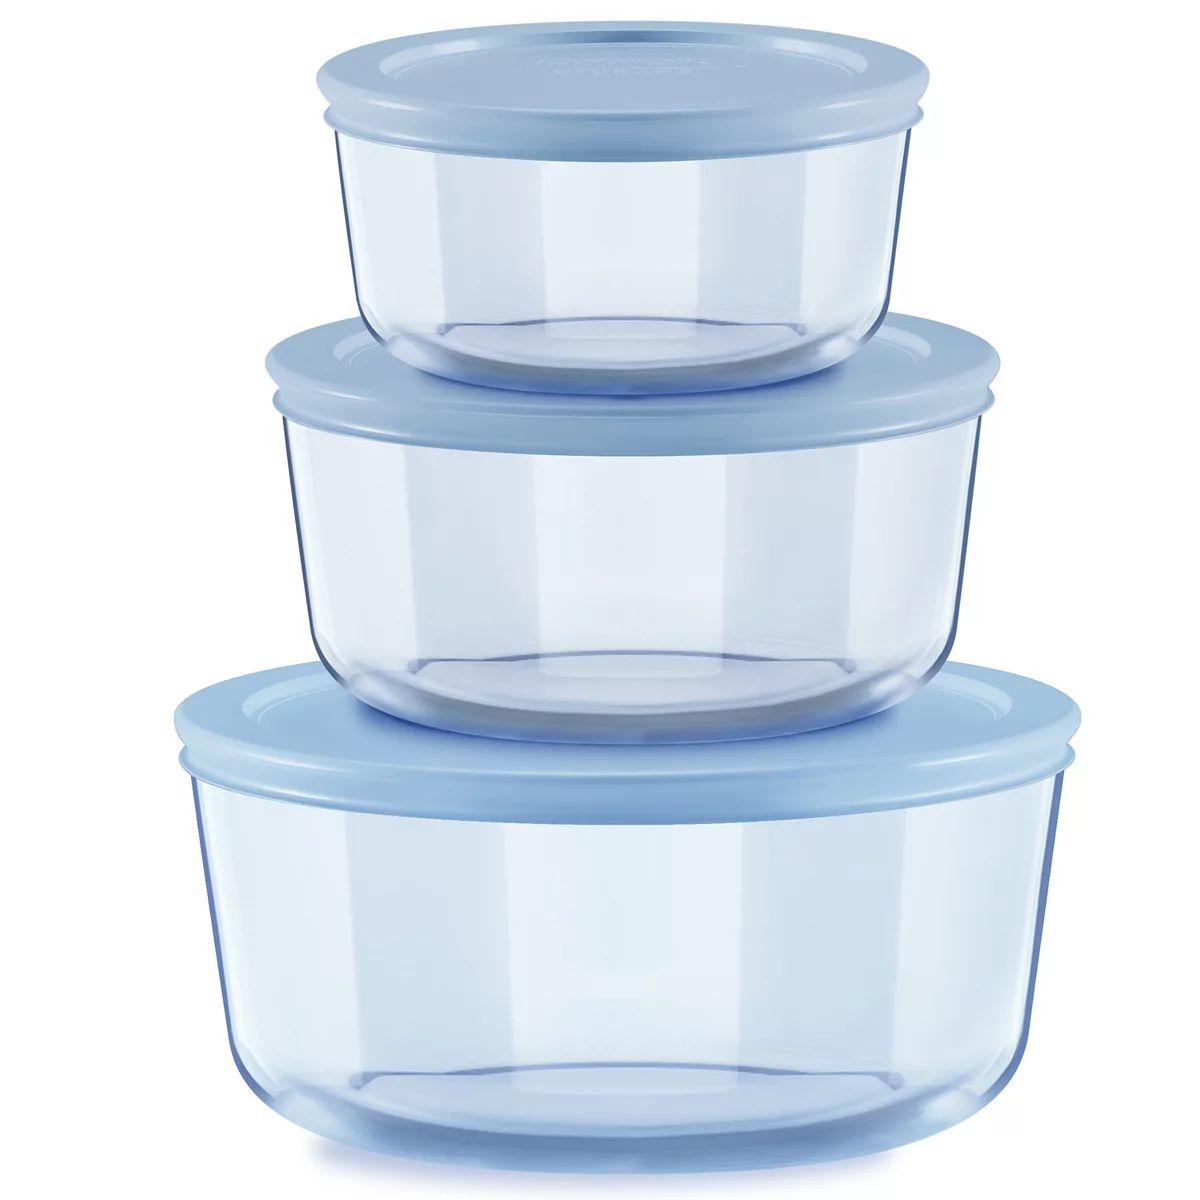 Pyrex Simply Store Blue Tinted 6-piece Round Food Storage Set with Plastic Lids | Kohl's